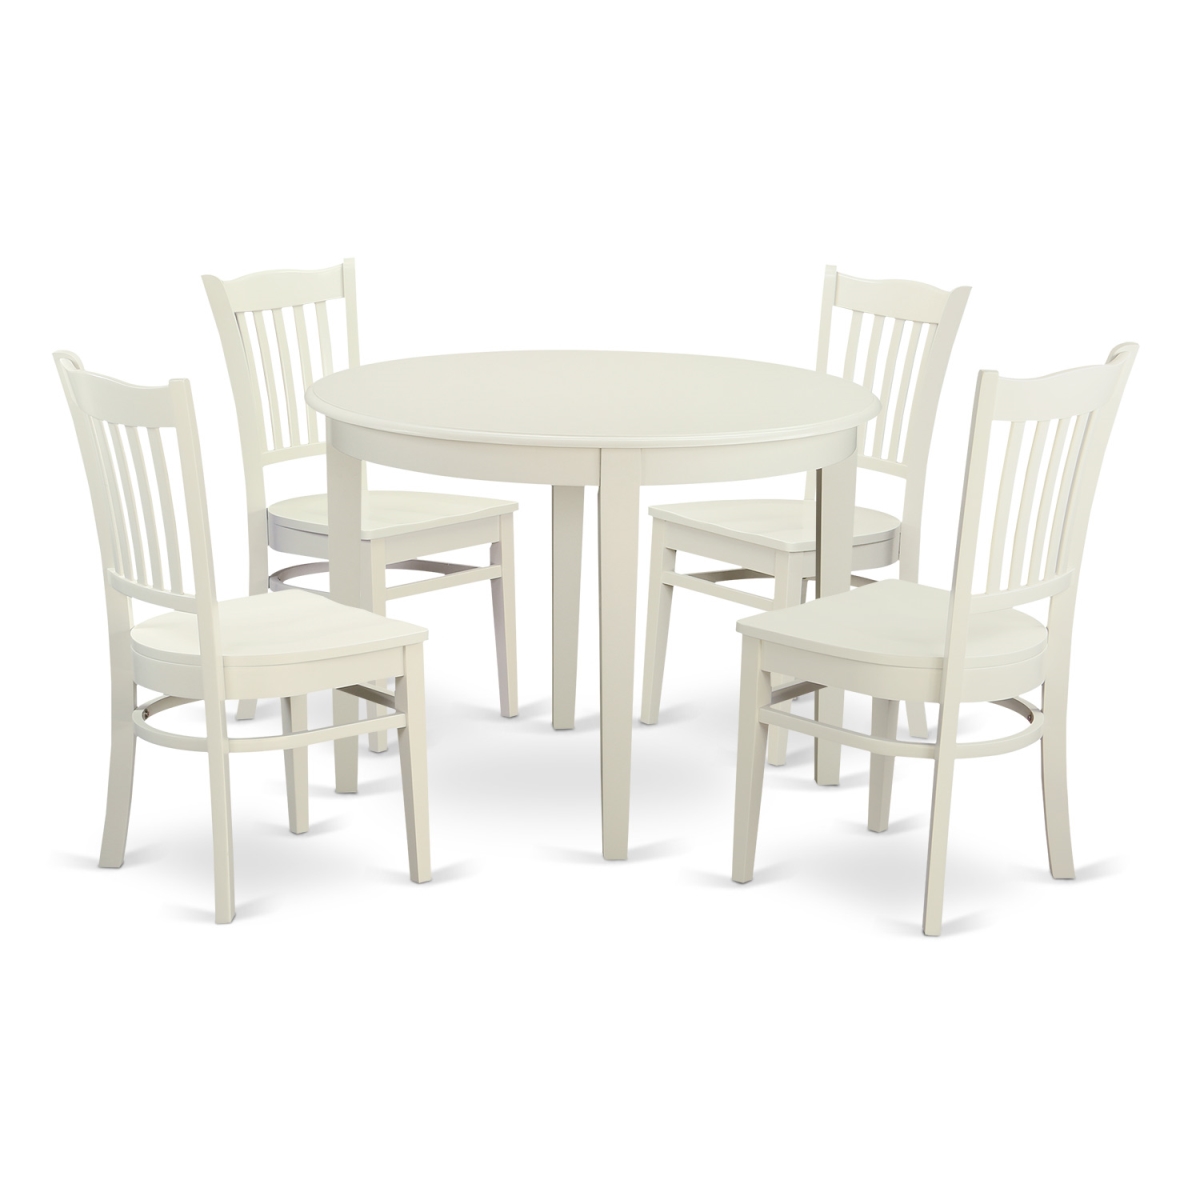 Dinette Set - Small Kitchen Table & 4 Chairs, Linen White - 5 Piece